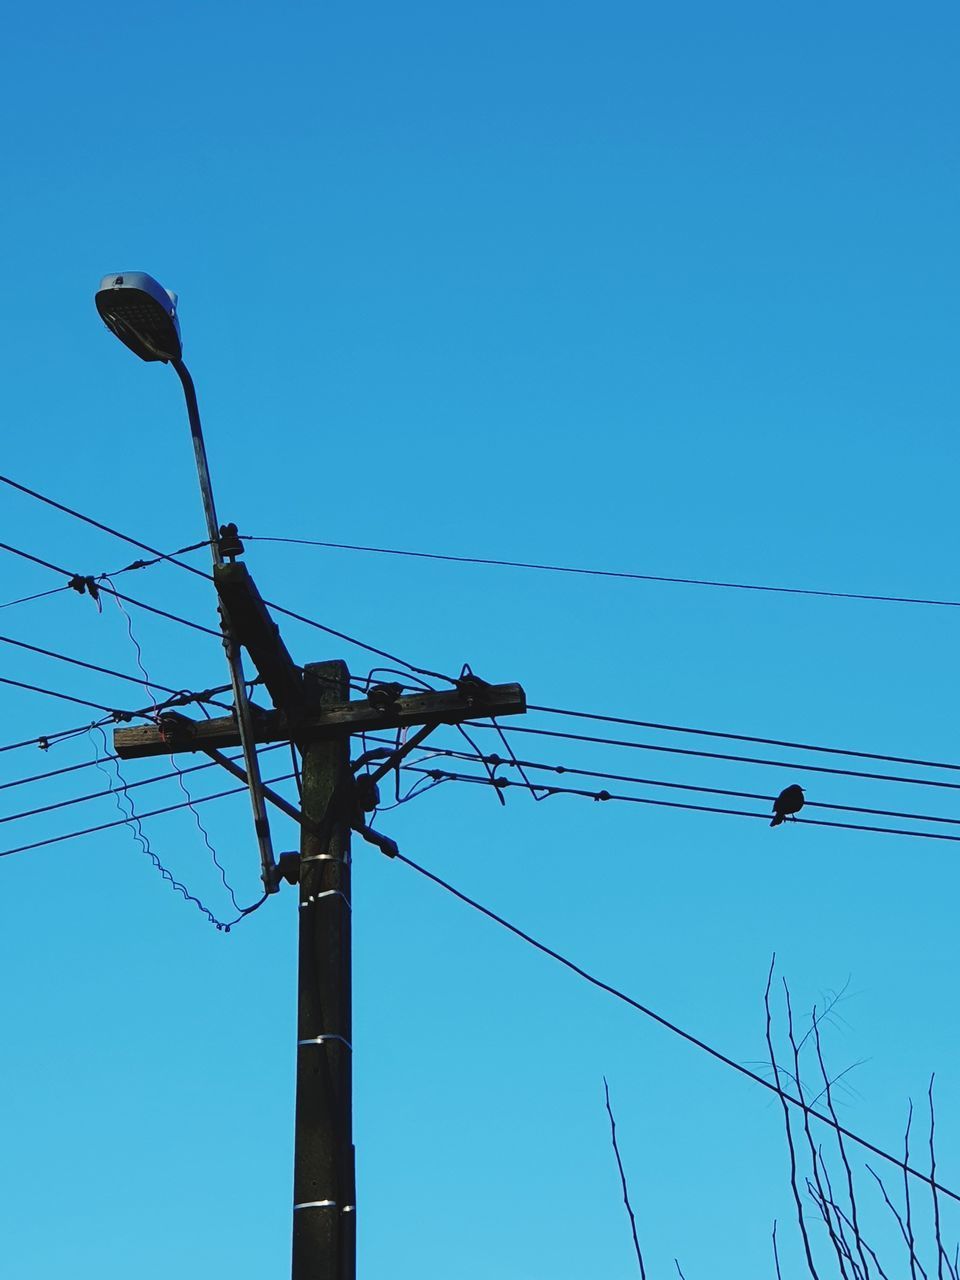 LOW ANGLE VIEW OF BIRD ON CABLE AGAINST CLEAR SKY